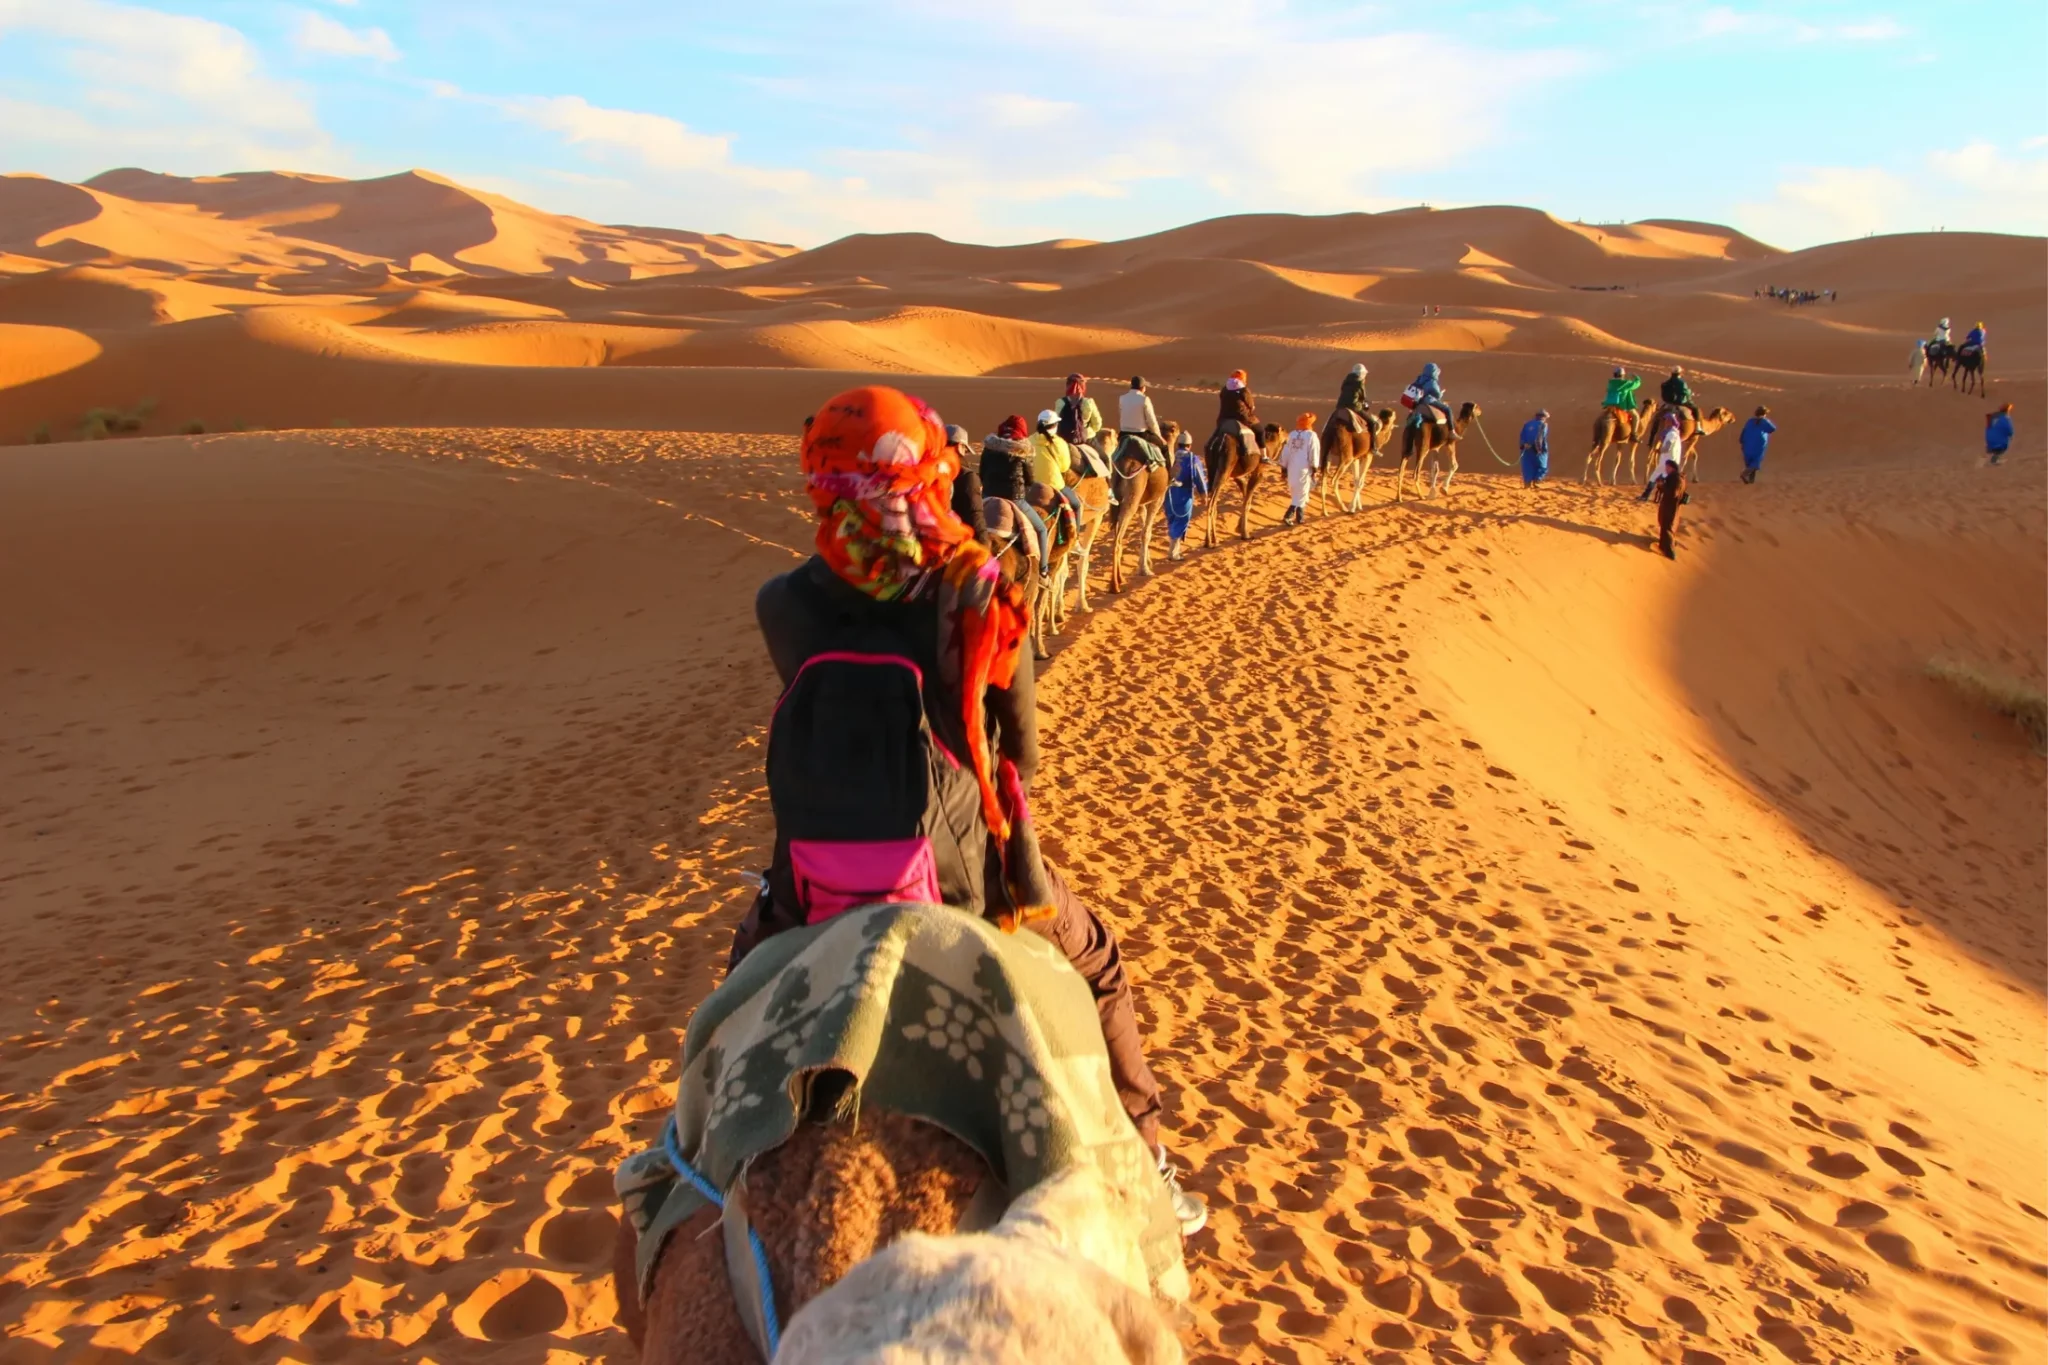 Tourists on Camels in the Morocco Desert